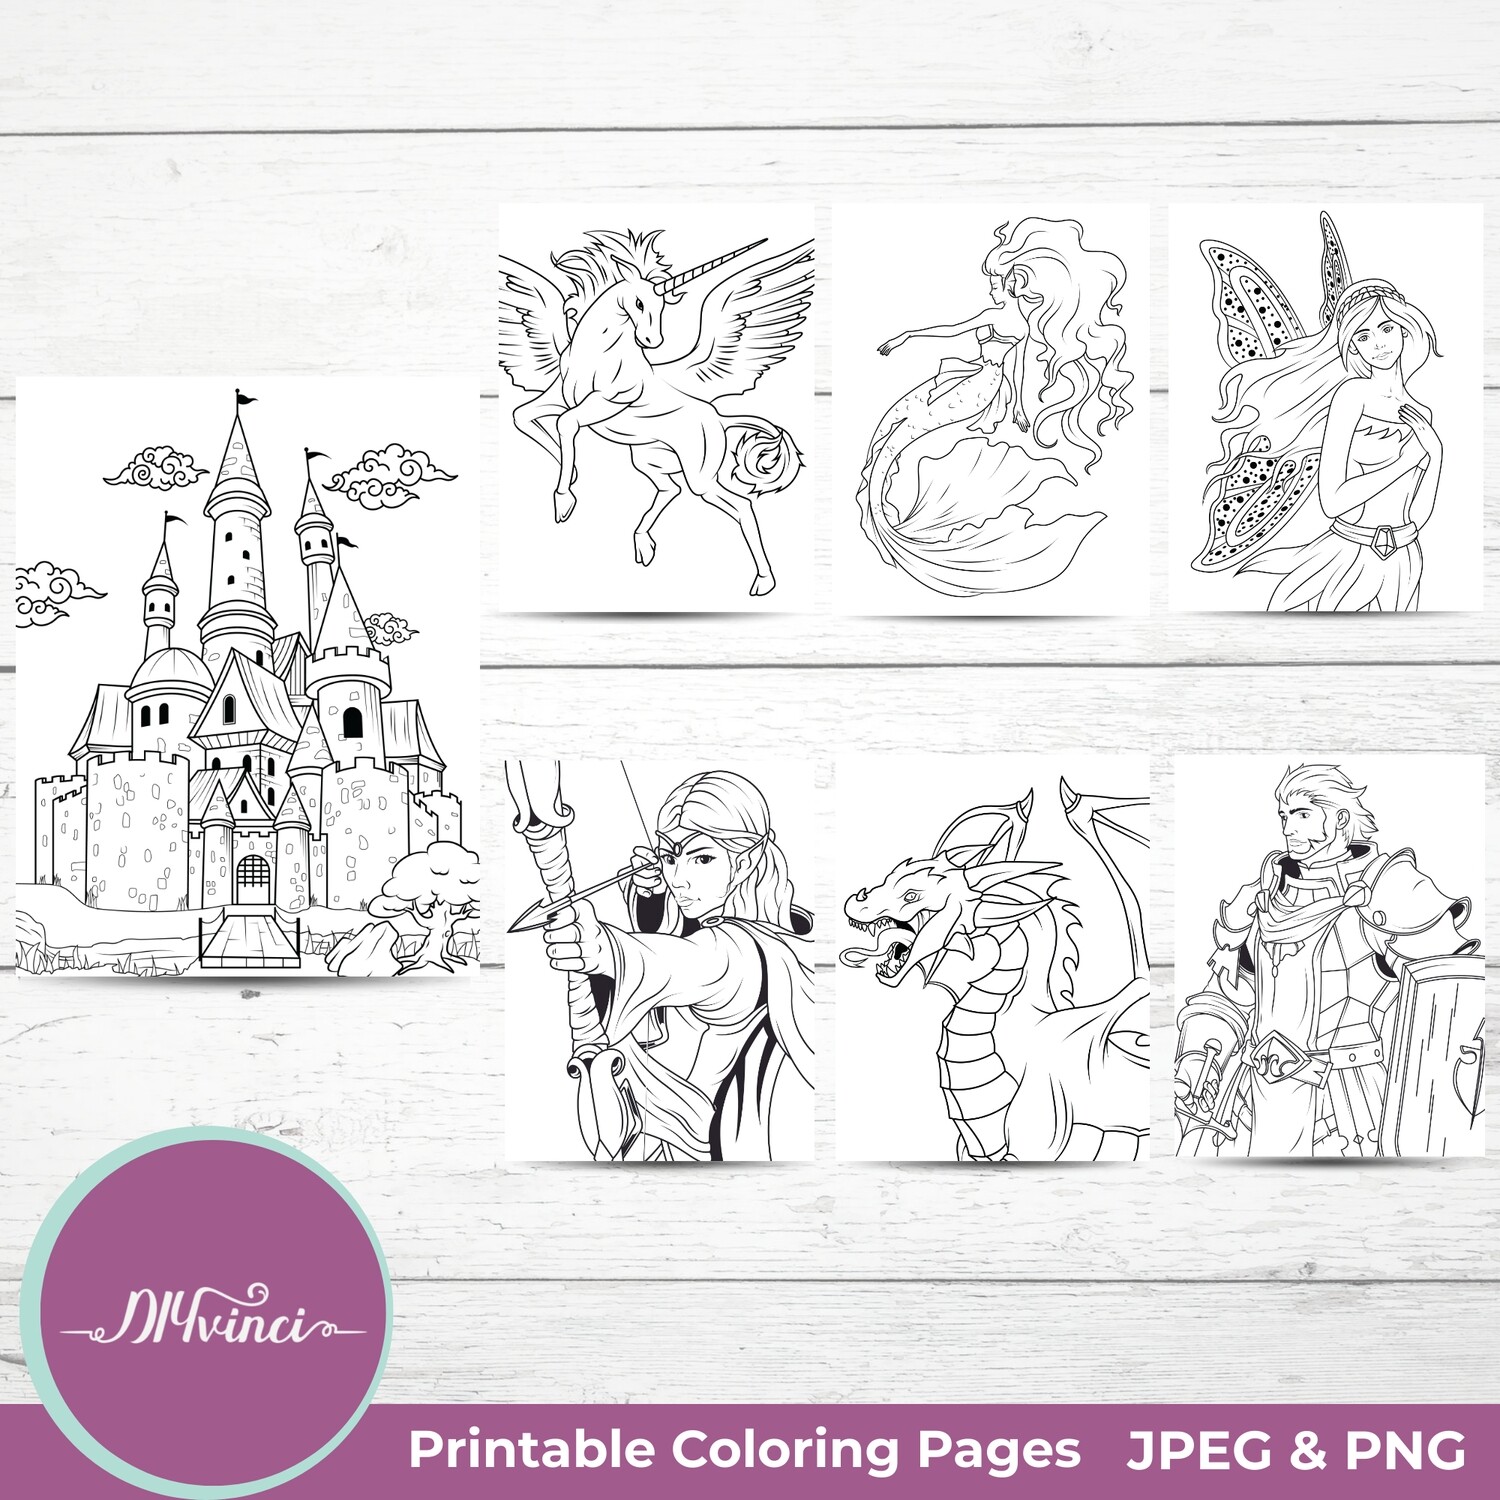 7 Printable Fantasy Coloring Pages - JPEG - Personal & Commercial Use